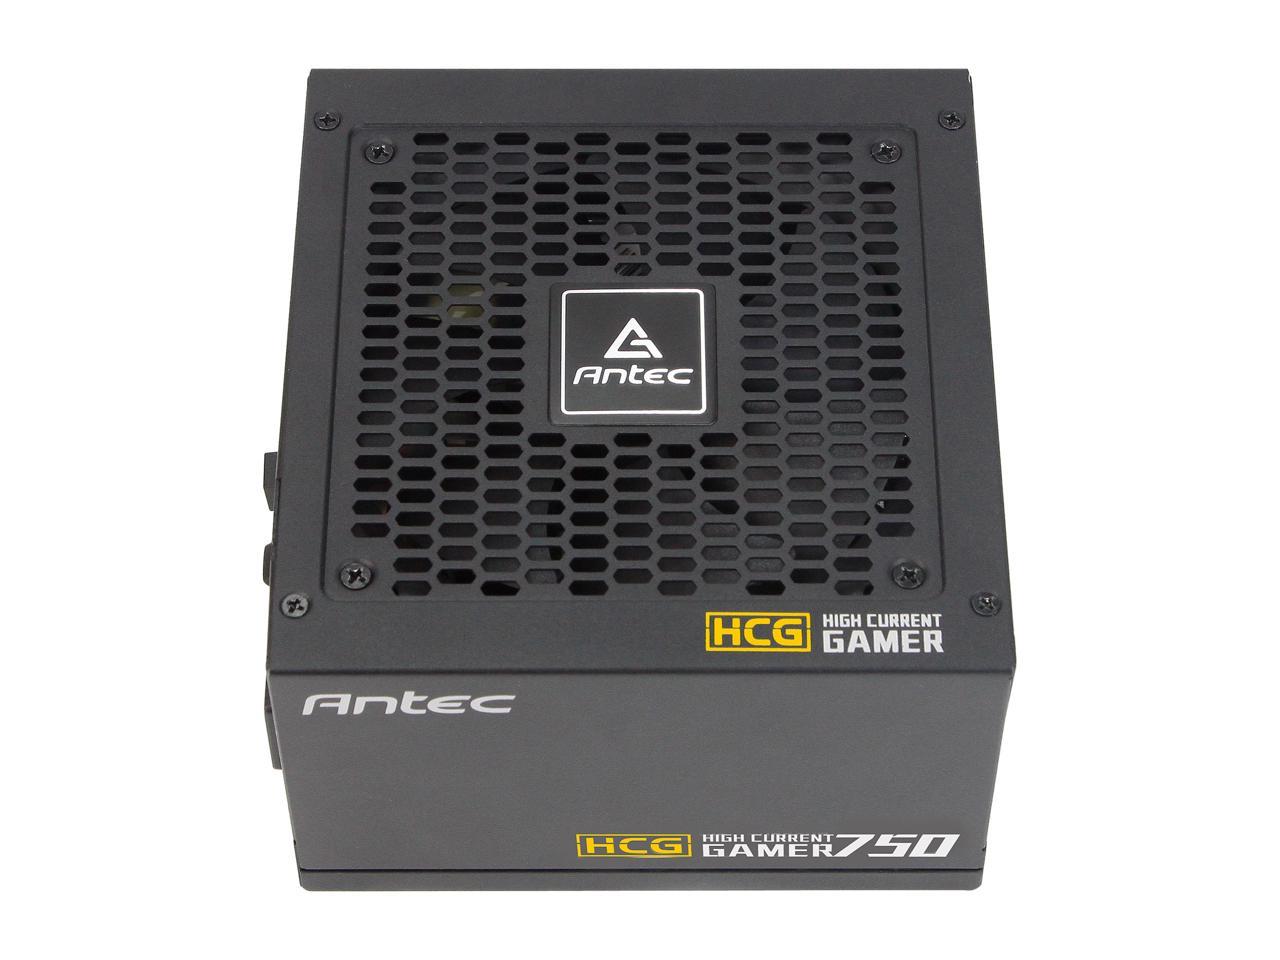 Antec High Current Gamer Series HCG750 Gold, 750W Fully Modular, Full-Bridge LLC and DC to DC Converter Design, Full Japanese Caps, Zero RPM Manager, Compacted Size 140mm, 10 Year Warranty